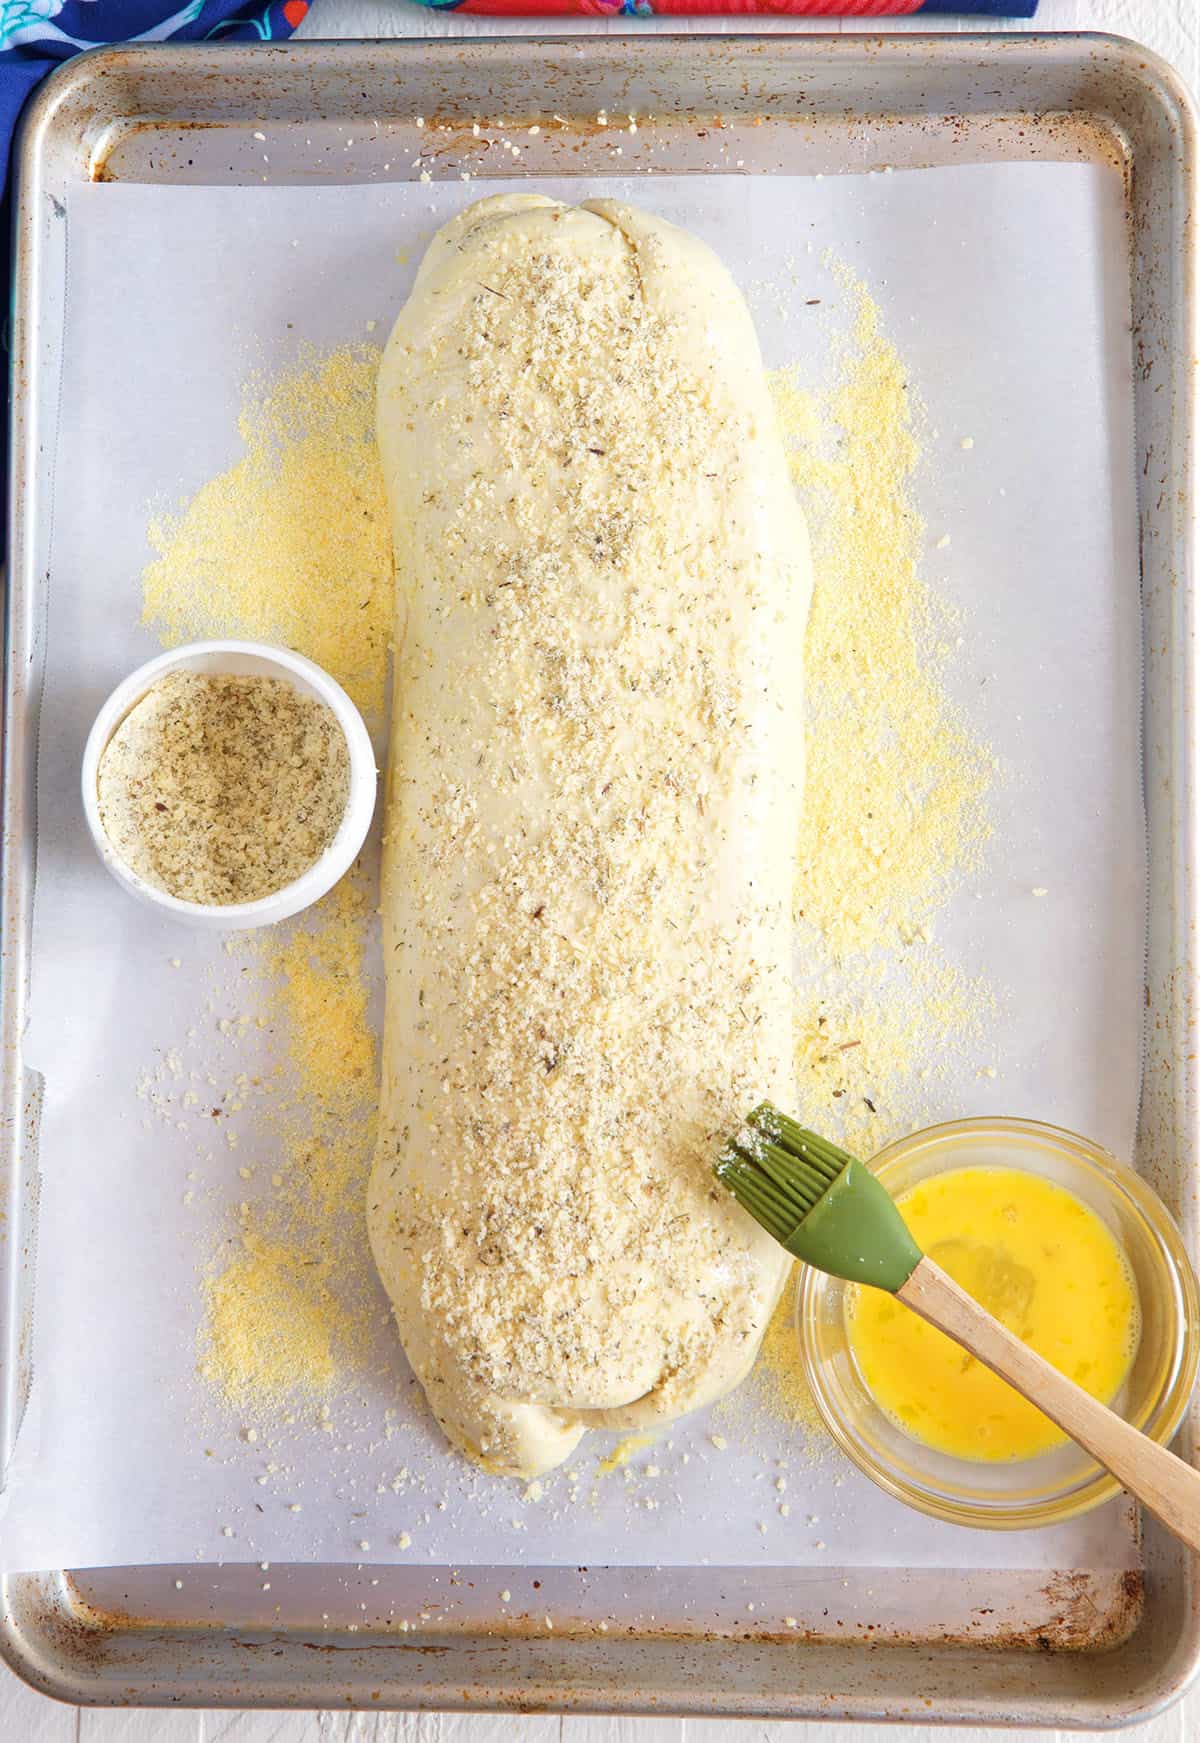 Butter and cheese are spread across the top of an uncooked stromboli.